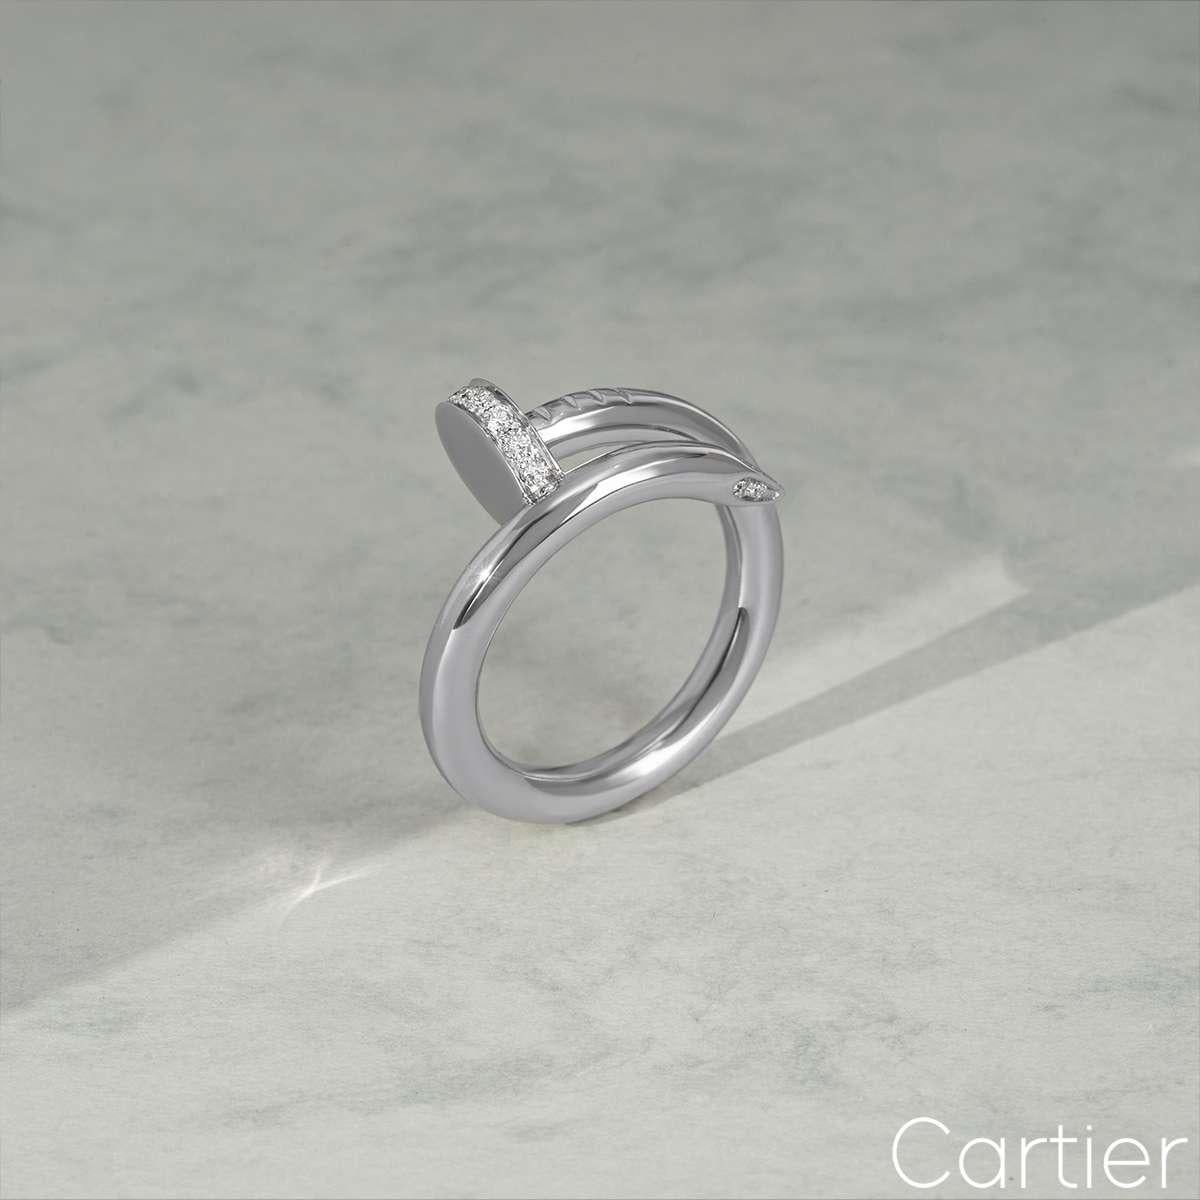 Cartier White Gold Diamond Juste un Clou Ring Size 56 B4092700 In Excellent Condition For Sale In London, GB